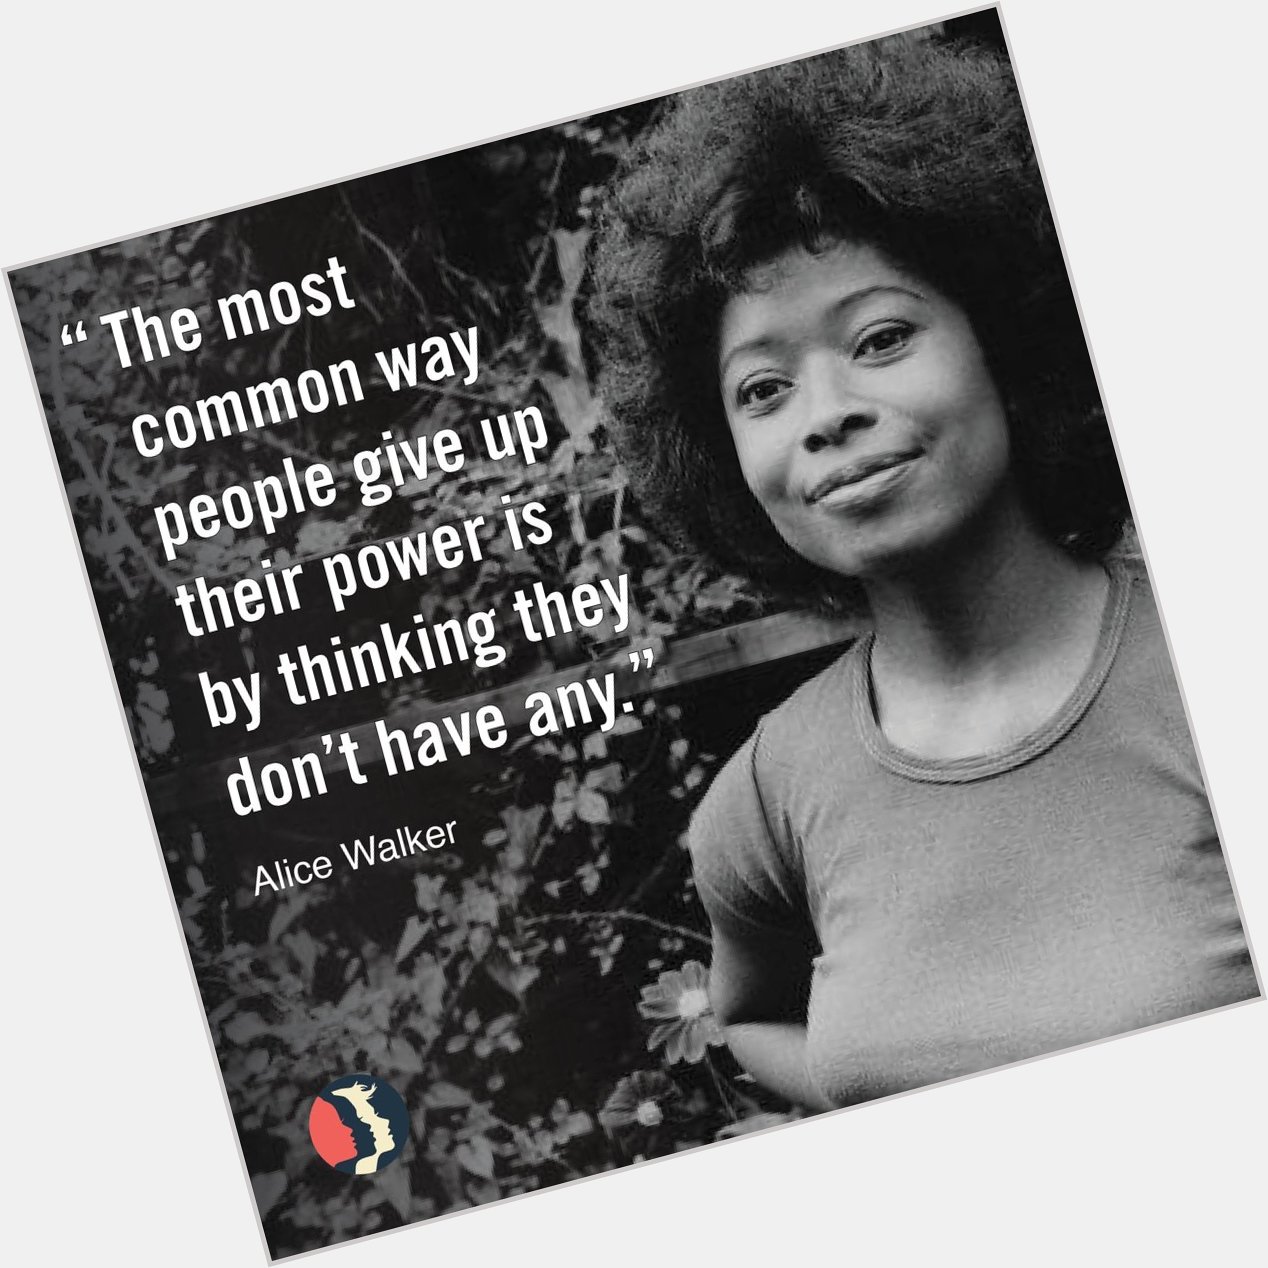 Womensmarch: Join us in wishing Alice Walker a very happy birthday! Thank you for your 